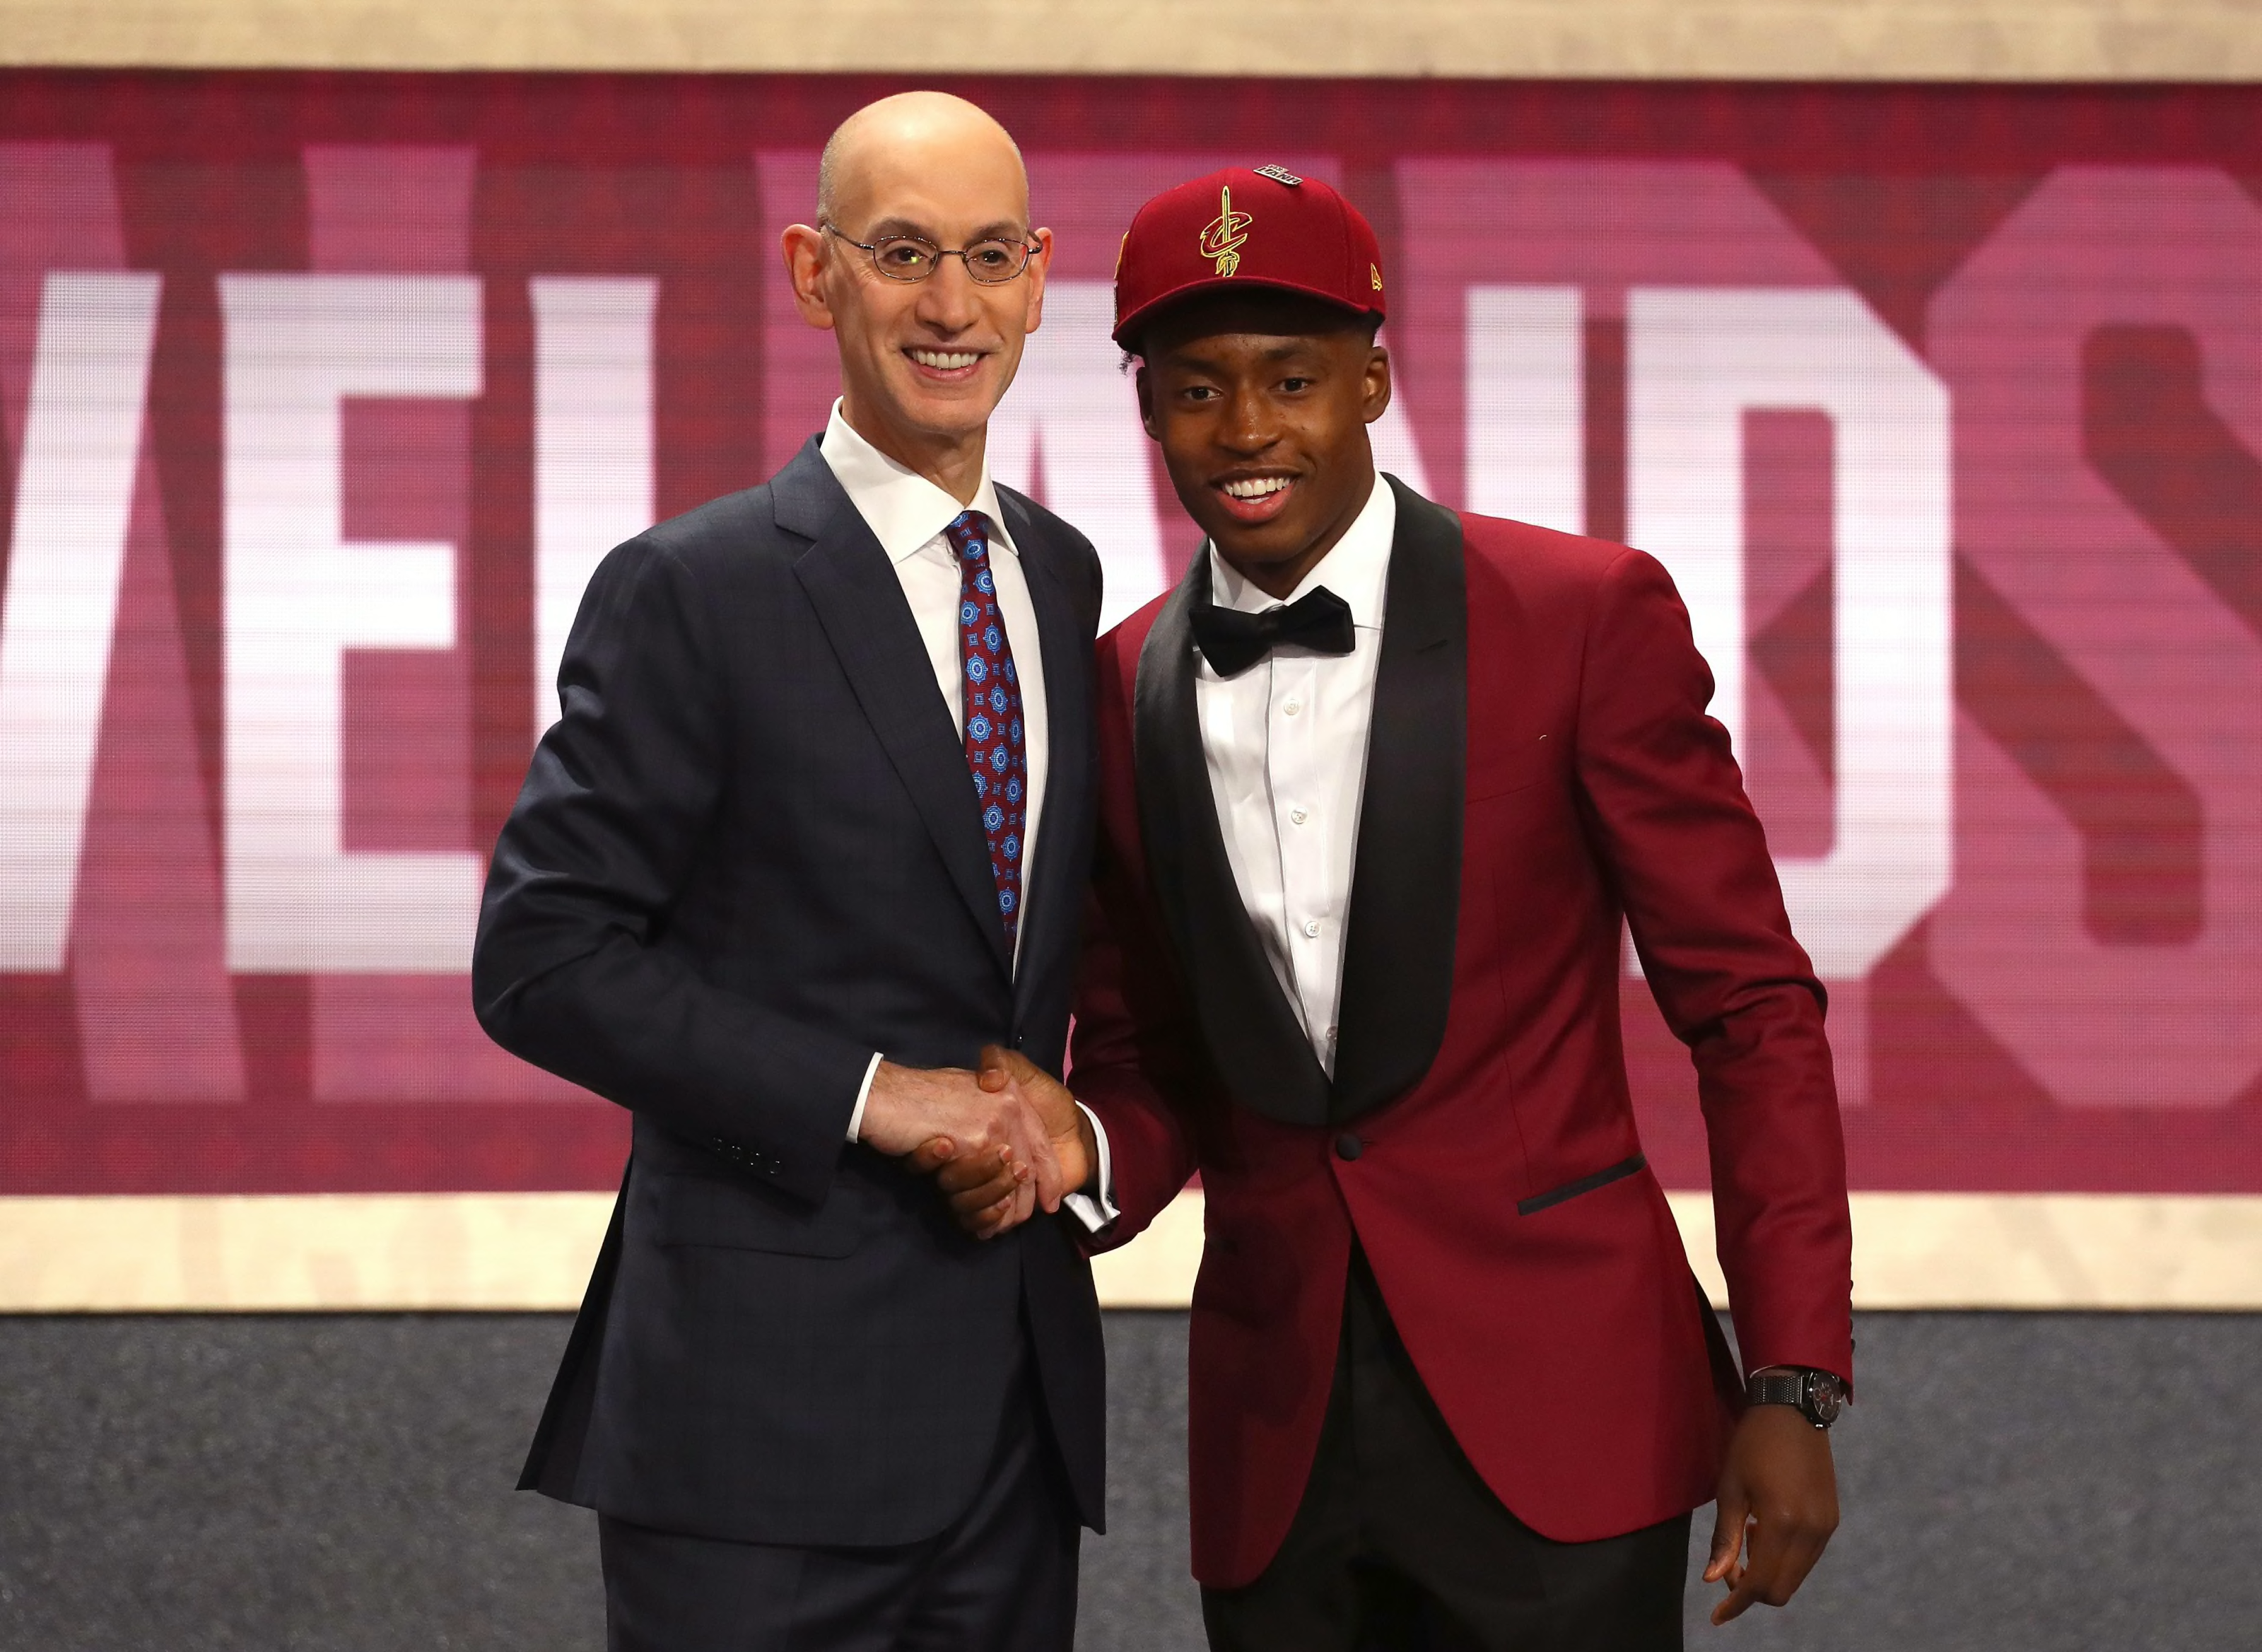 Cleveland Cavaliers win No. 3 pick in 2021 NBA Draft